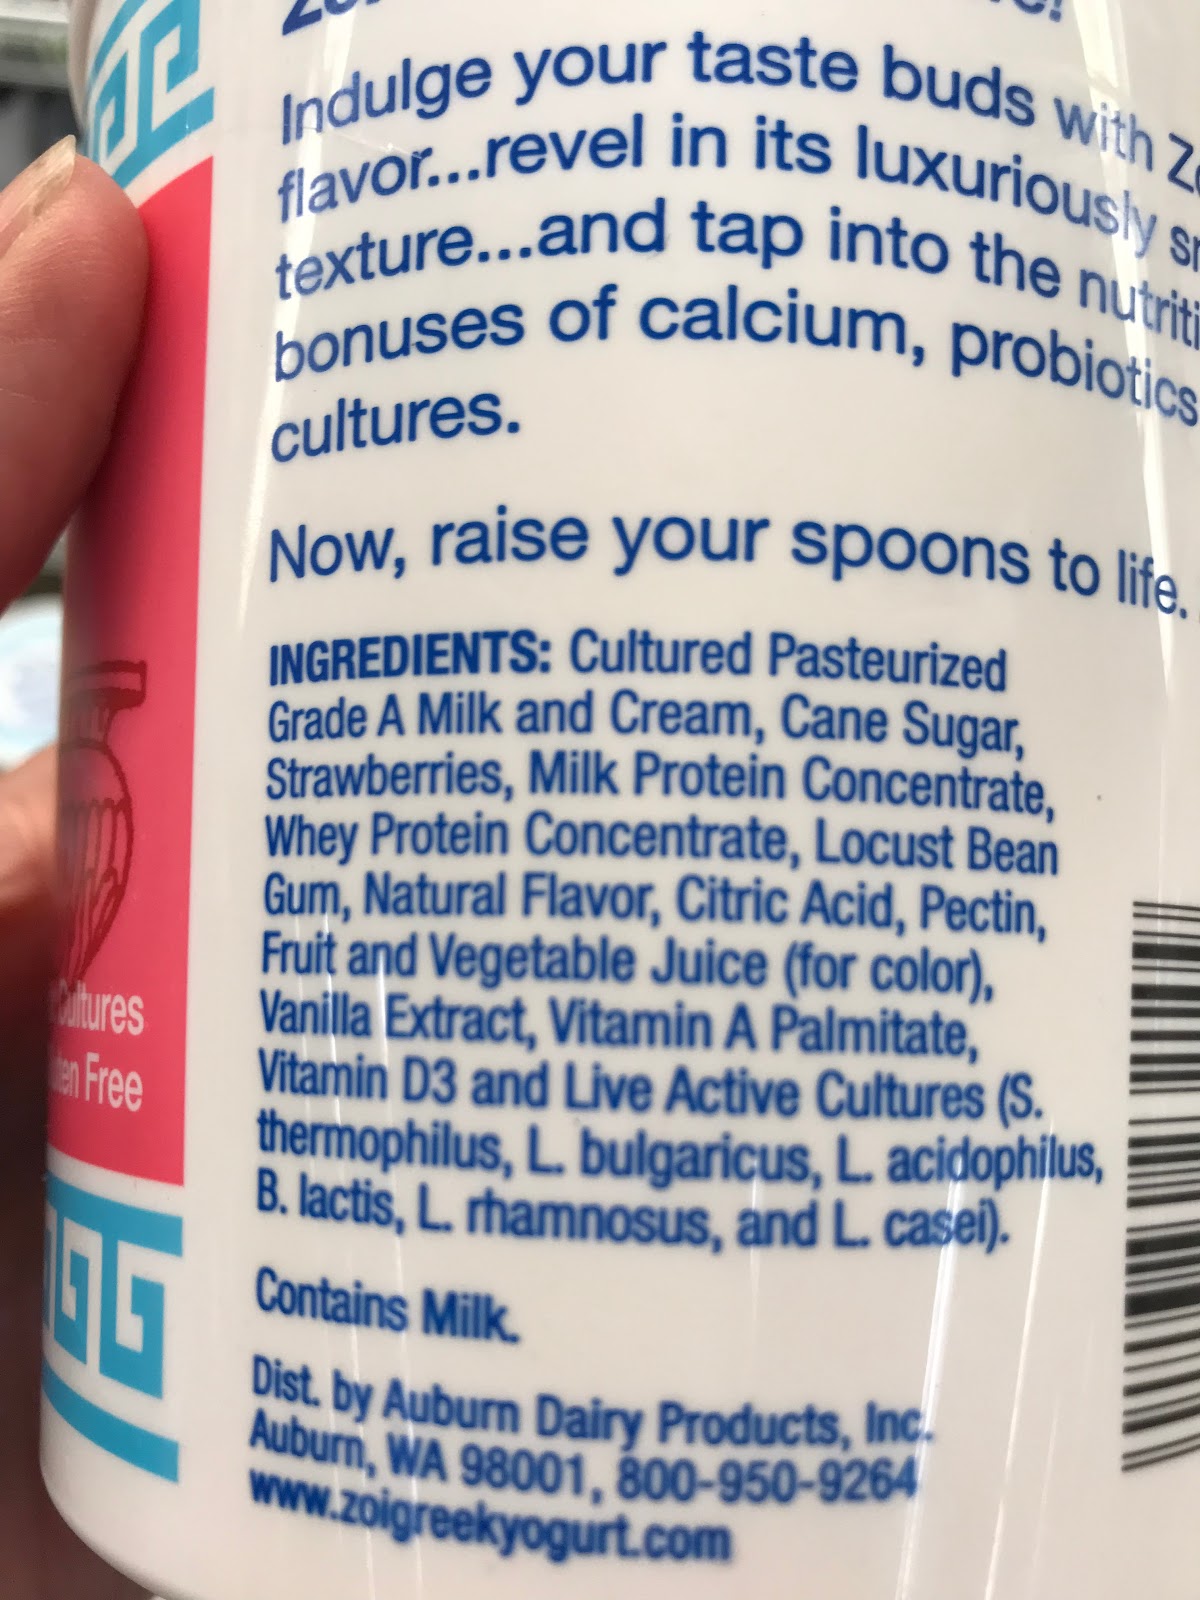 image showing ingredient list for strawberry yogurt listing milk, cane sugar, and strawberries as sugar sources